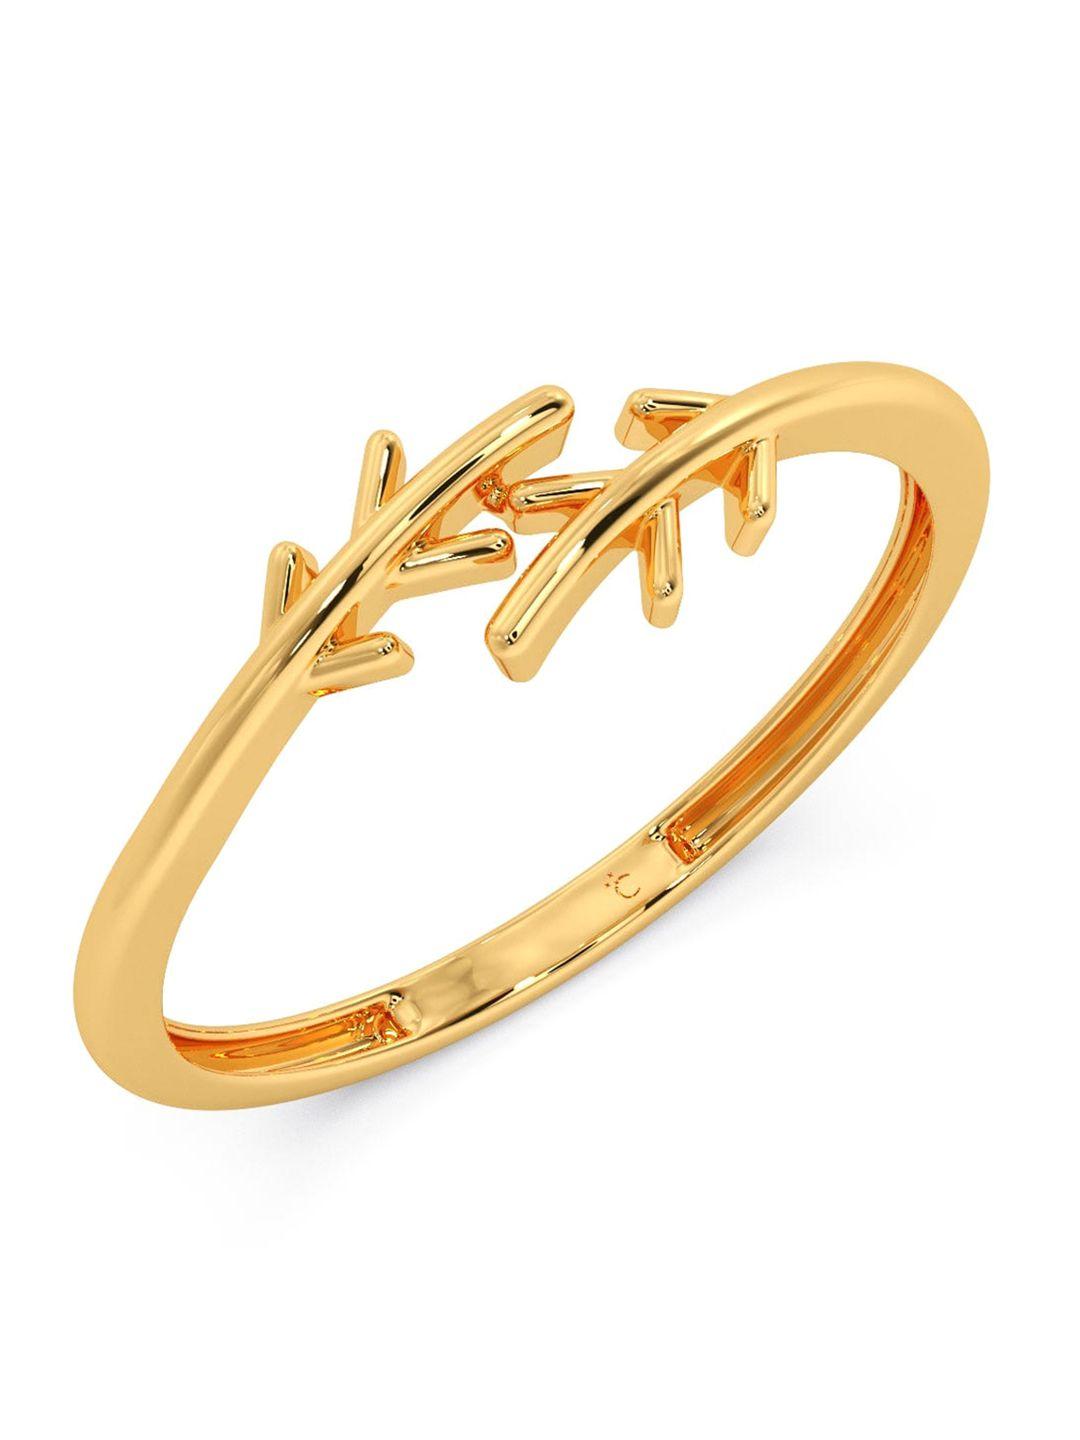 CANDERE A KALYAN JEWELLERS COMPANY 18KT Gold Ring-0.71gm